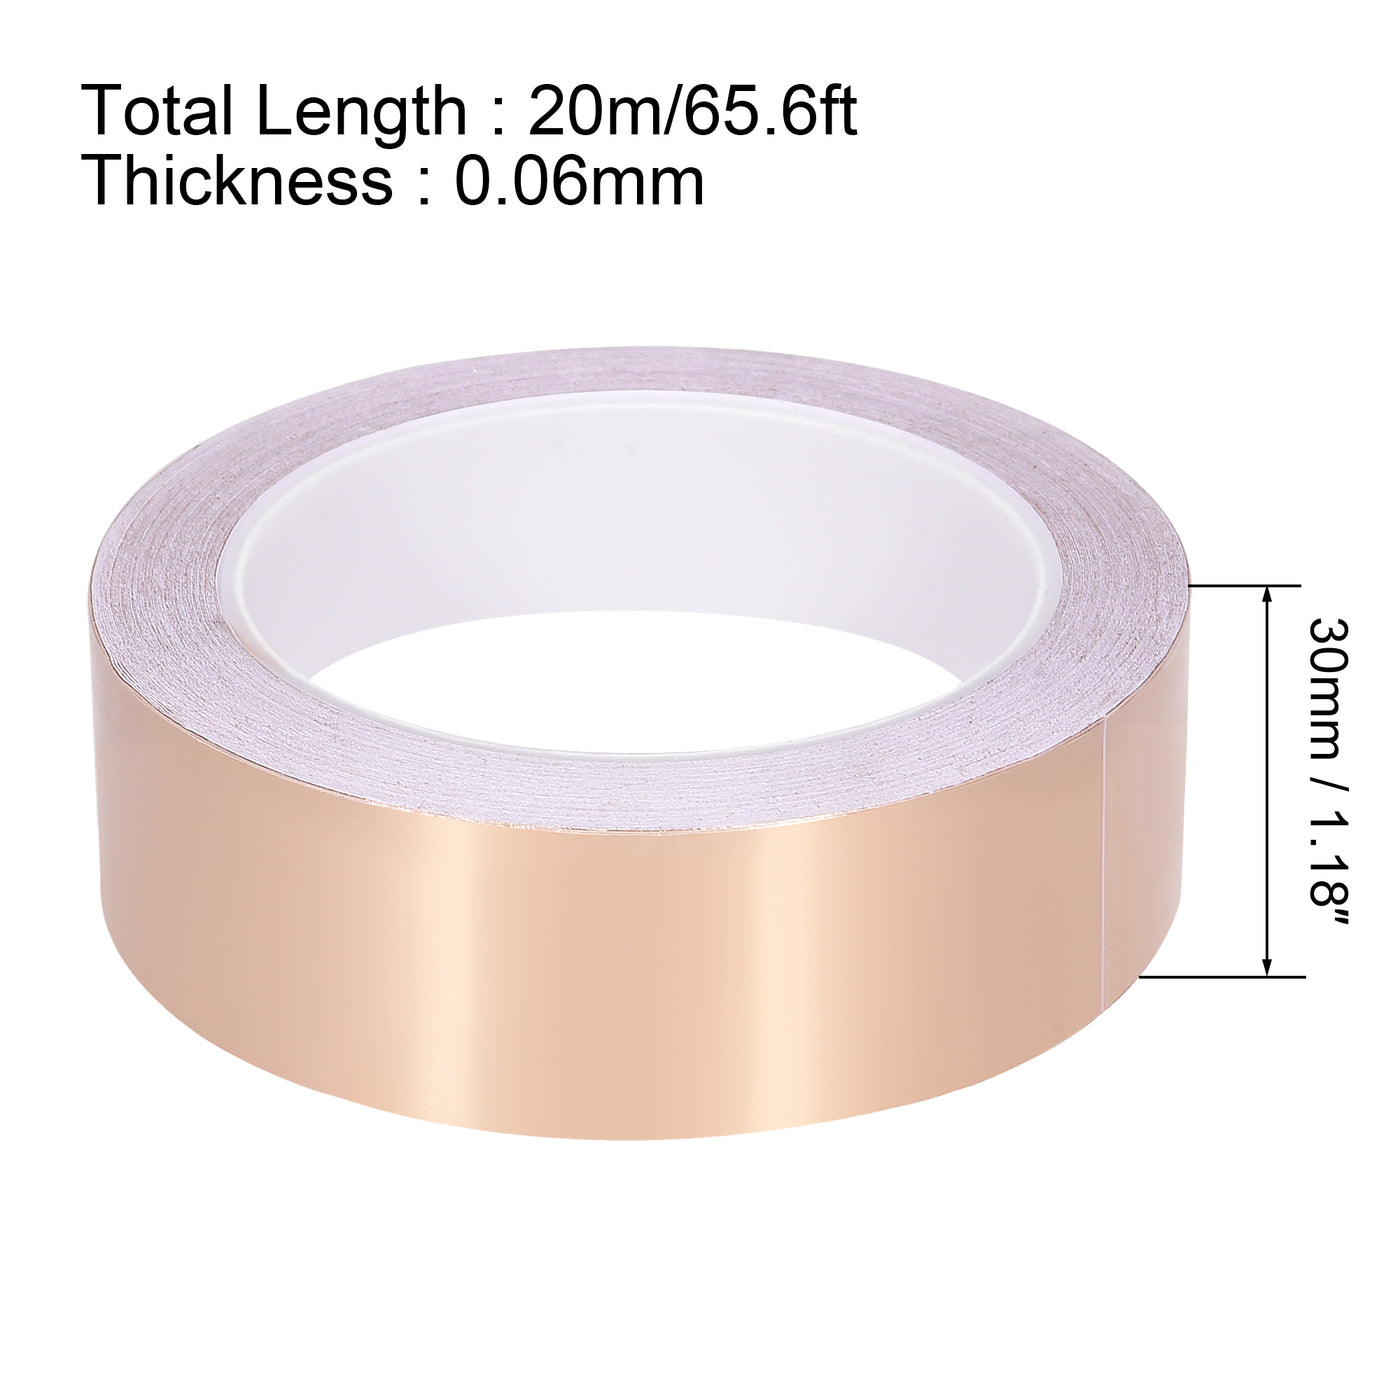 uxcell Uxcell Single-Sided Conductive Tape Copper Foil Tape 30mm x 20m/65.6ft for EMI Shielding 1pcs